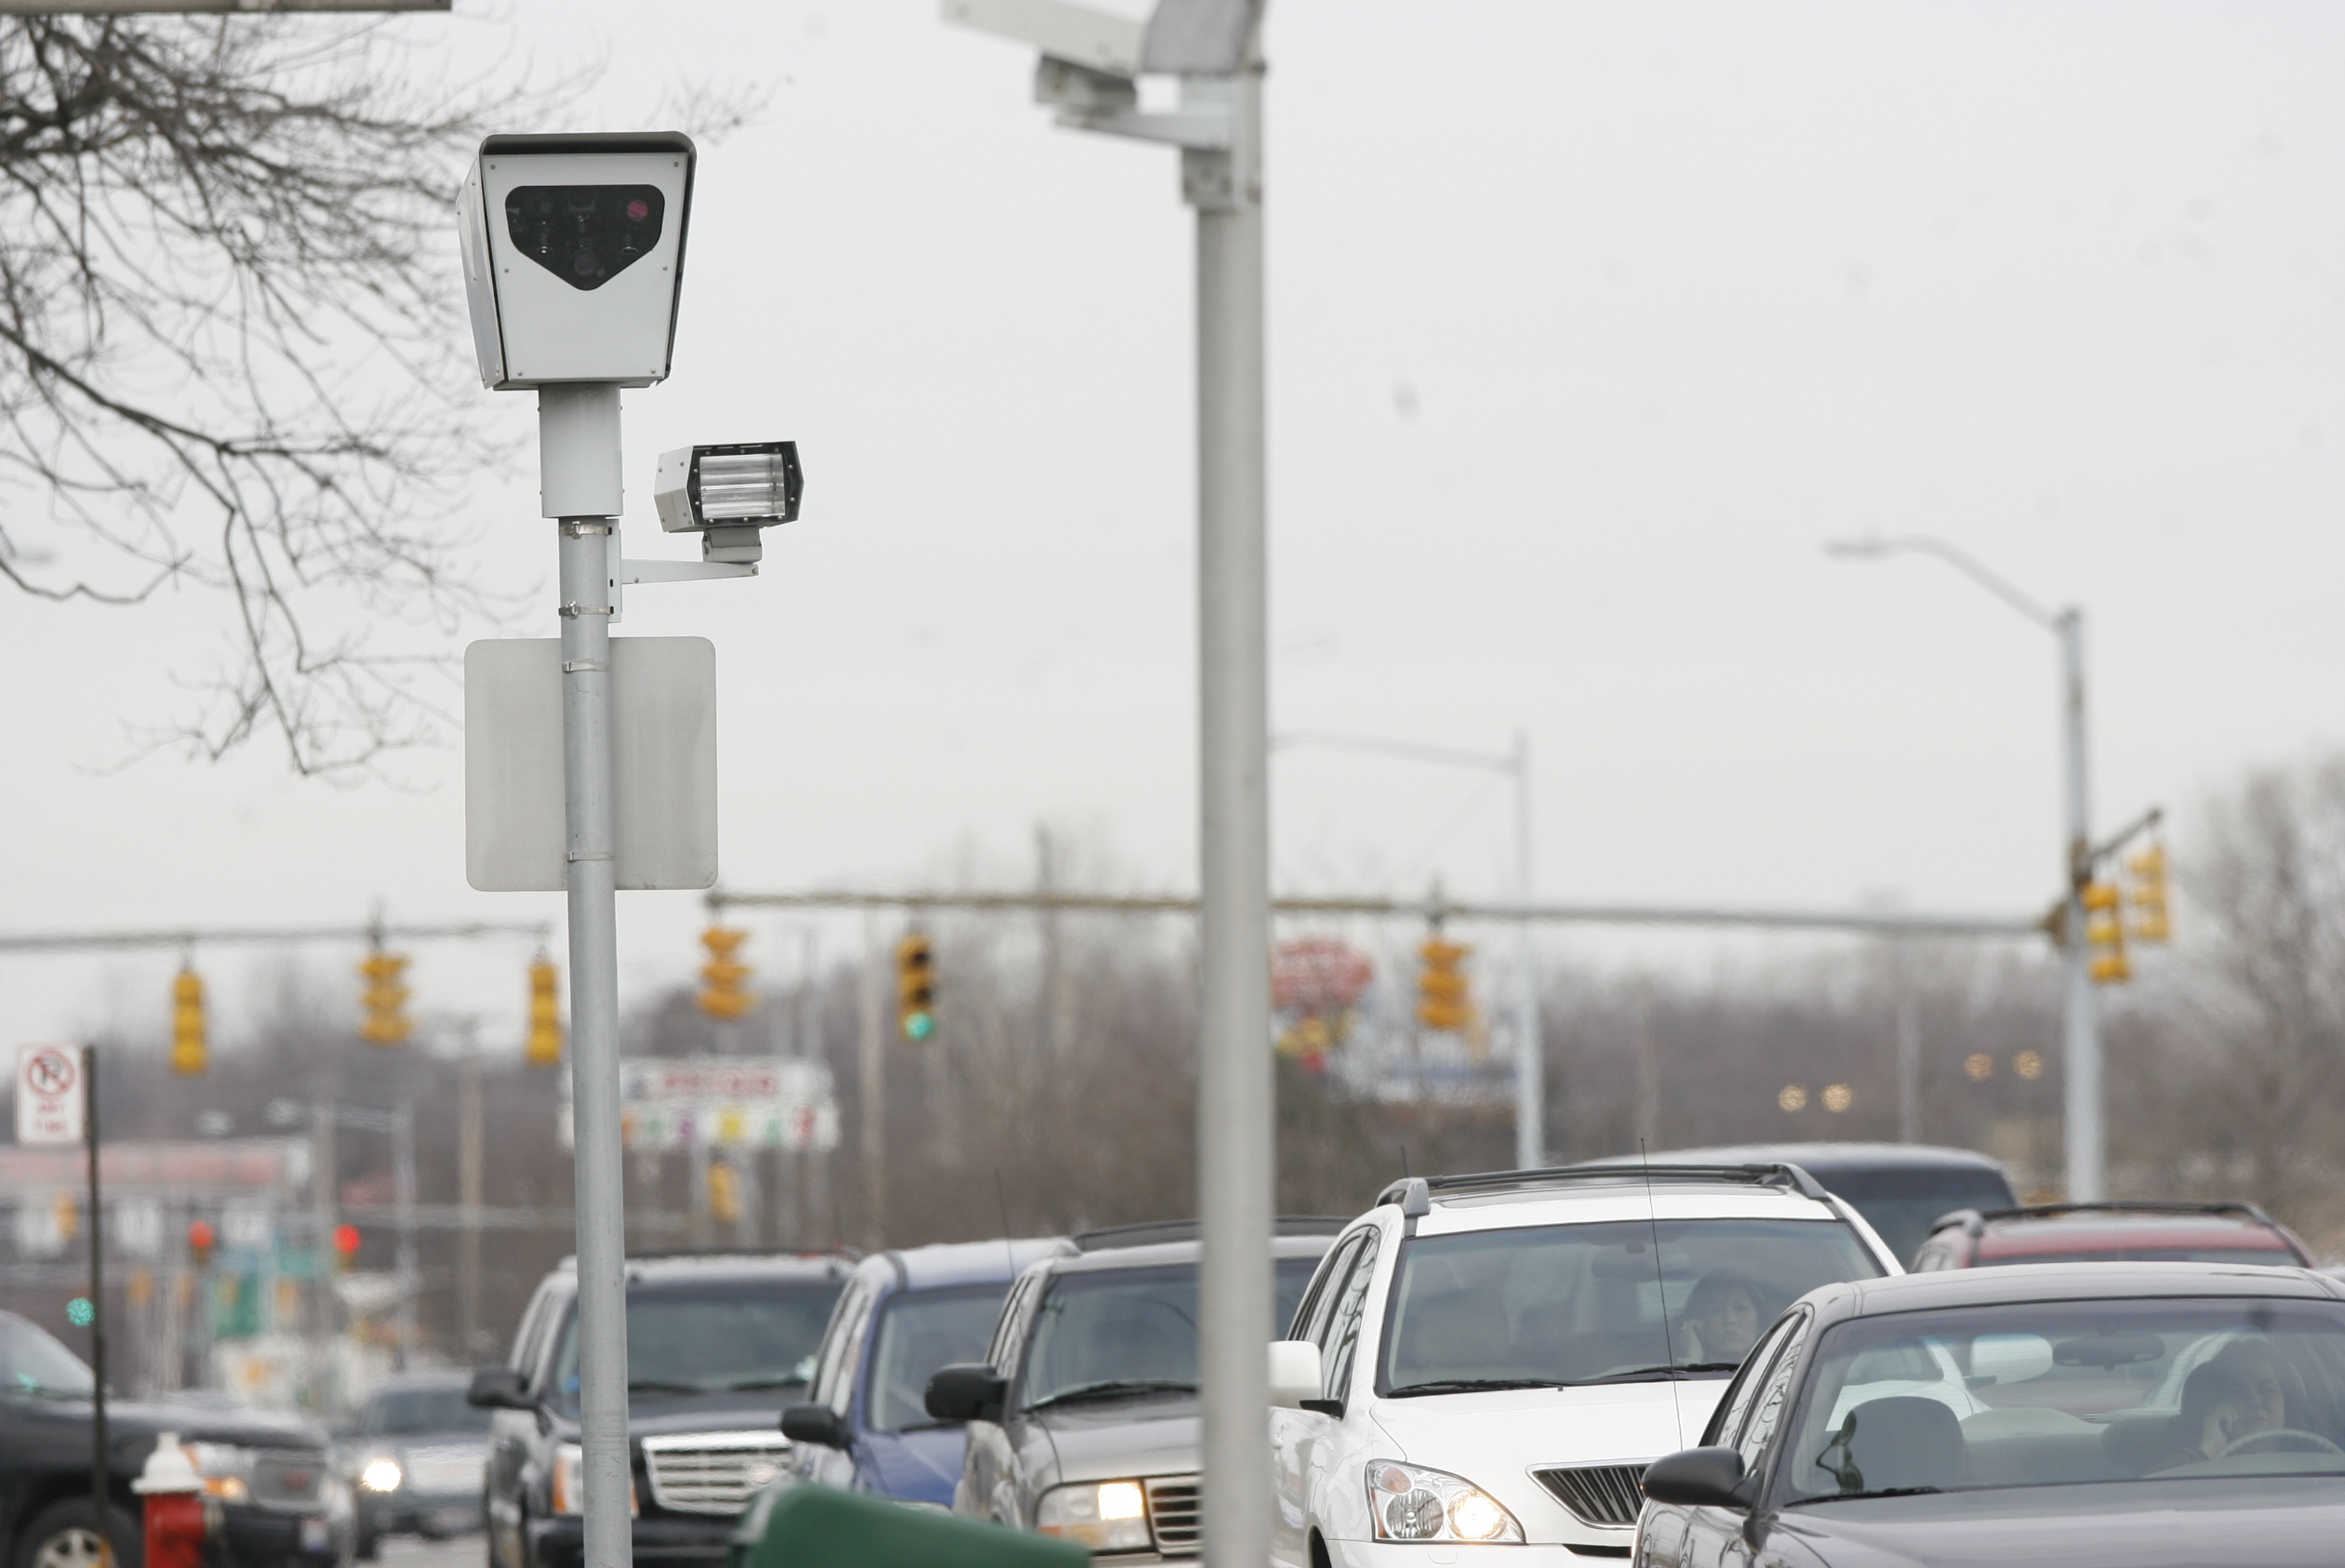 No decision yet on hearing process for traffic cameras The Blade